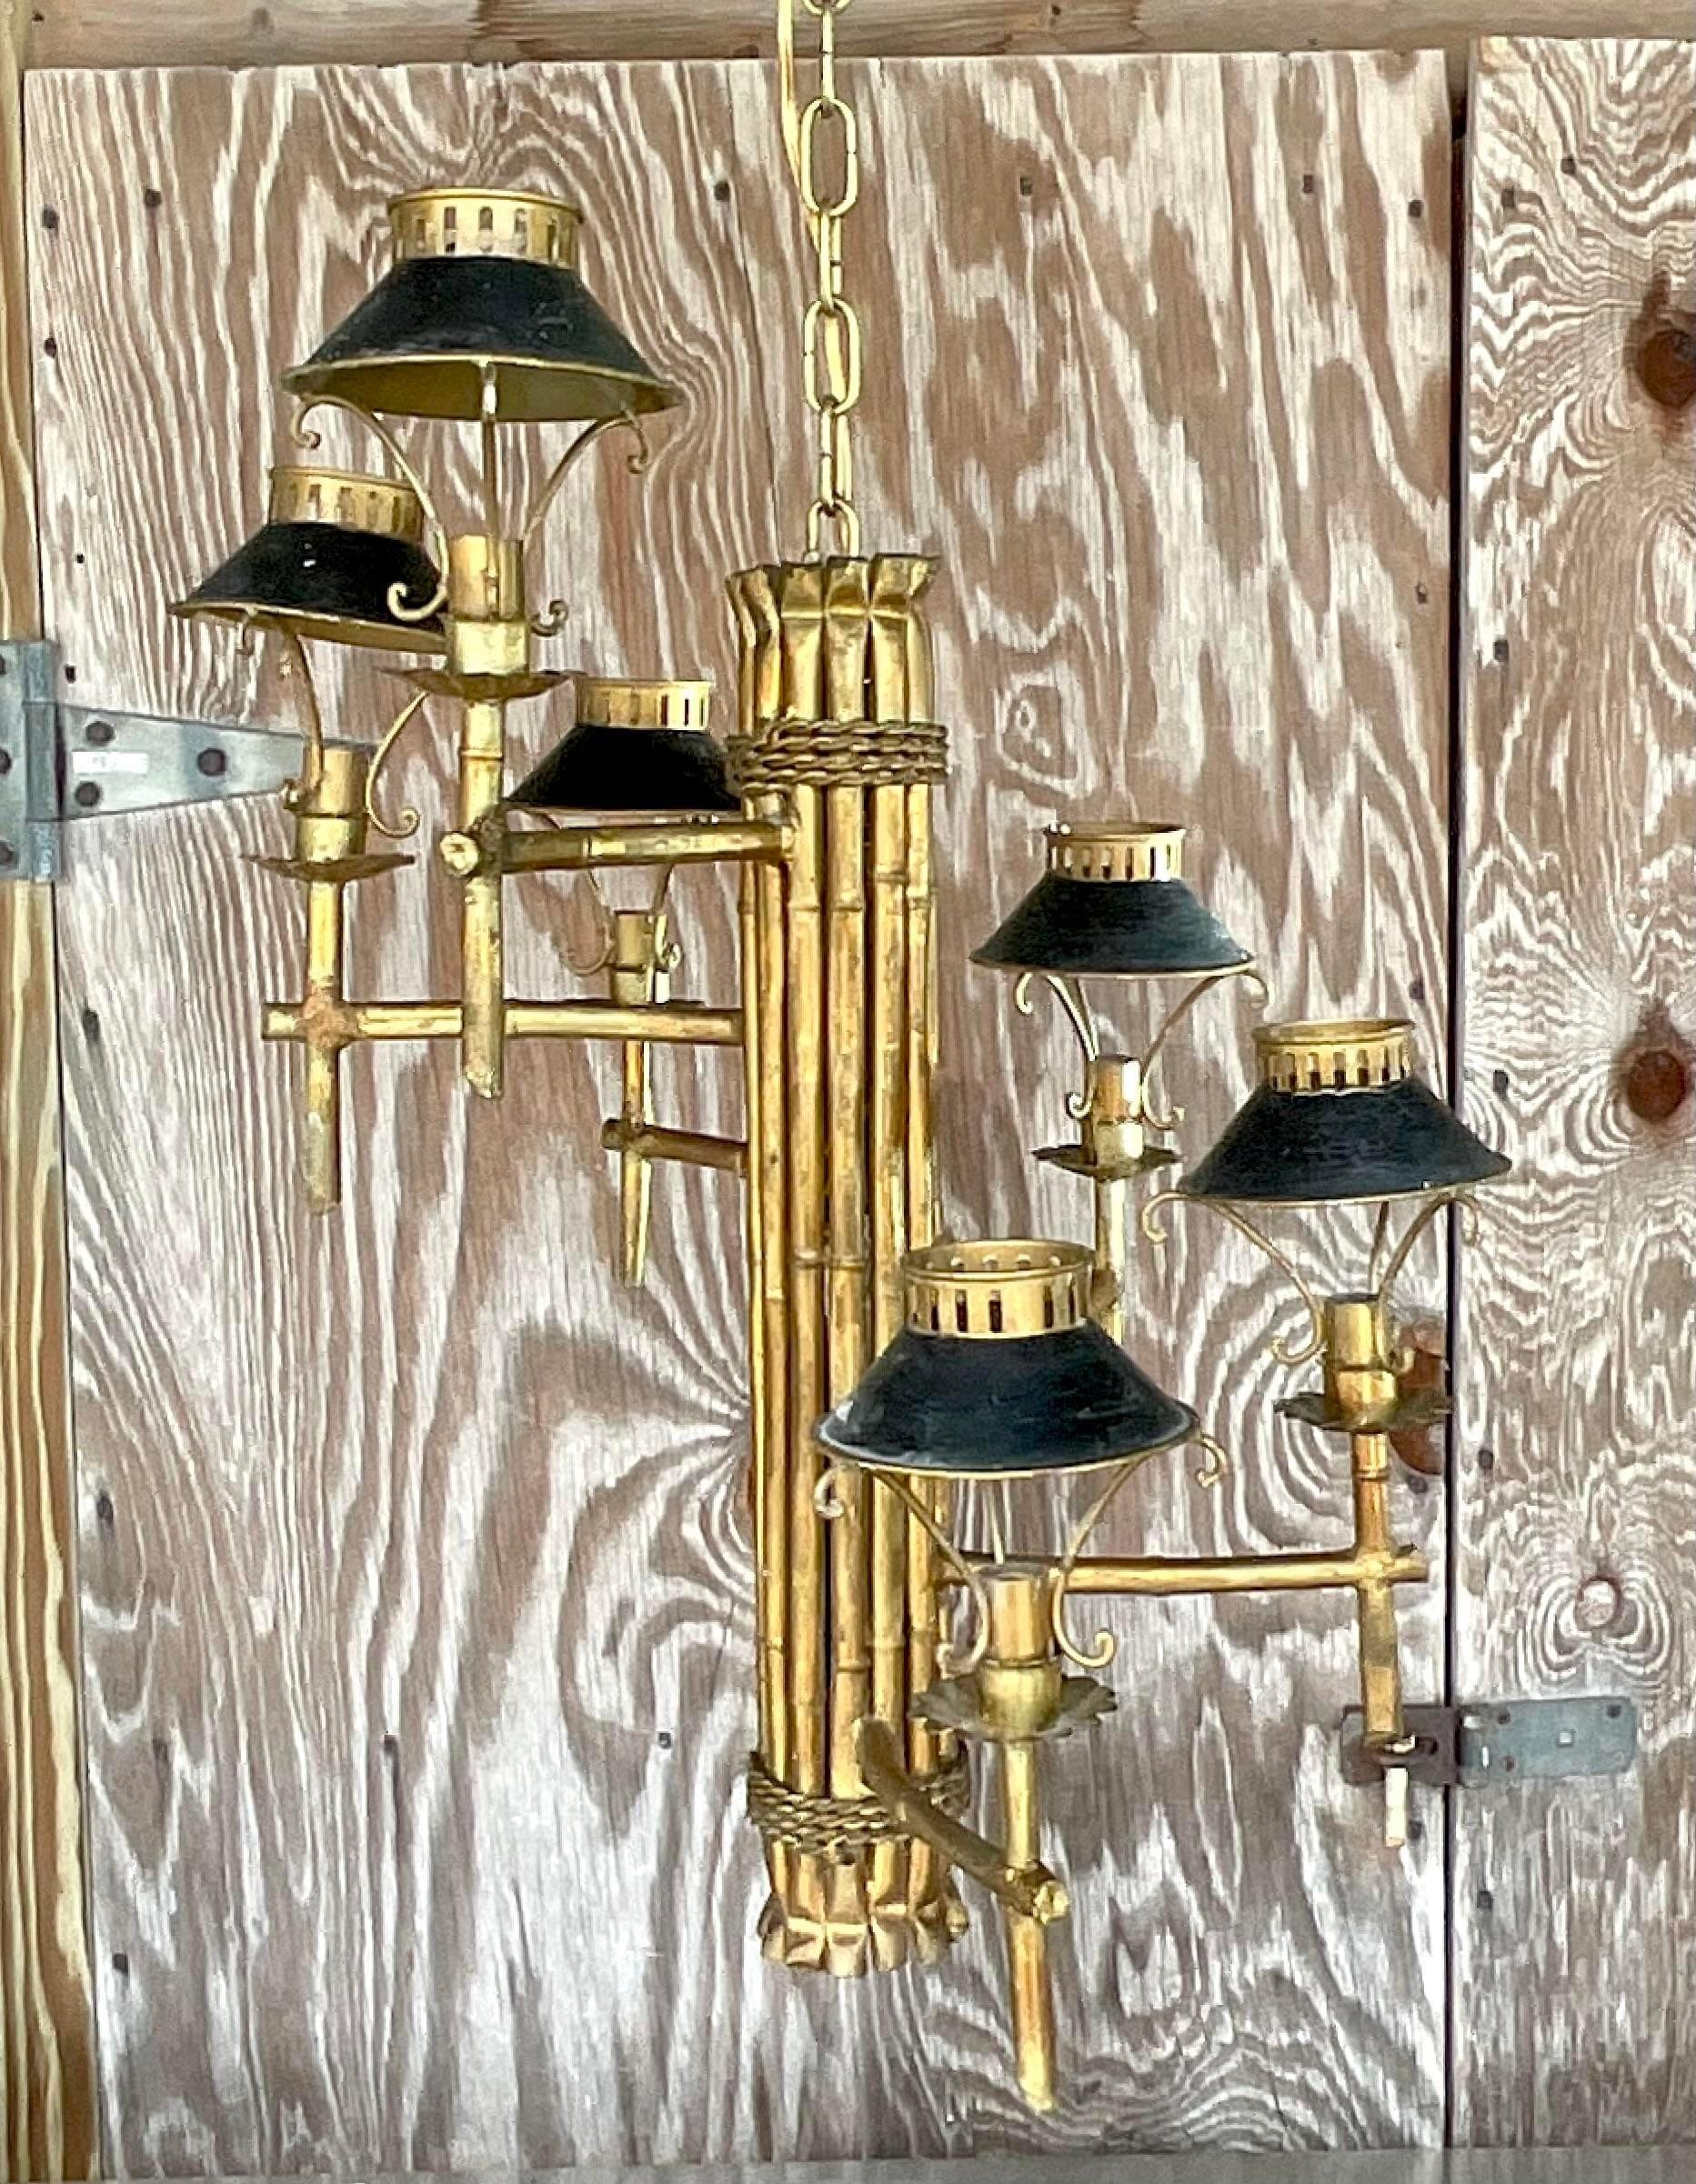 A fabulous vintage Regency spiral chandelier. A chic gilt bamboo center post with a spiral ring of small lanterns. Perfect in a tall stairwell! Acquired from a Palm Beach estate.